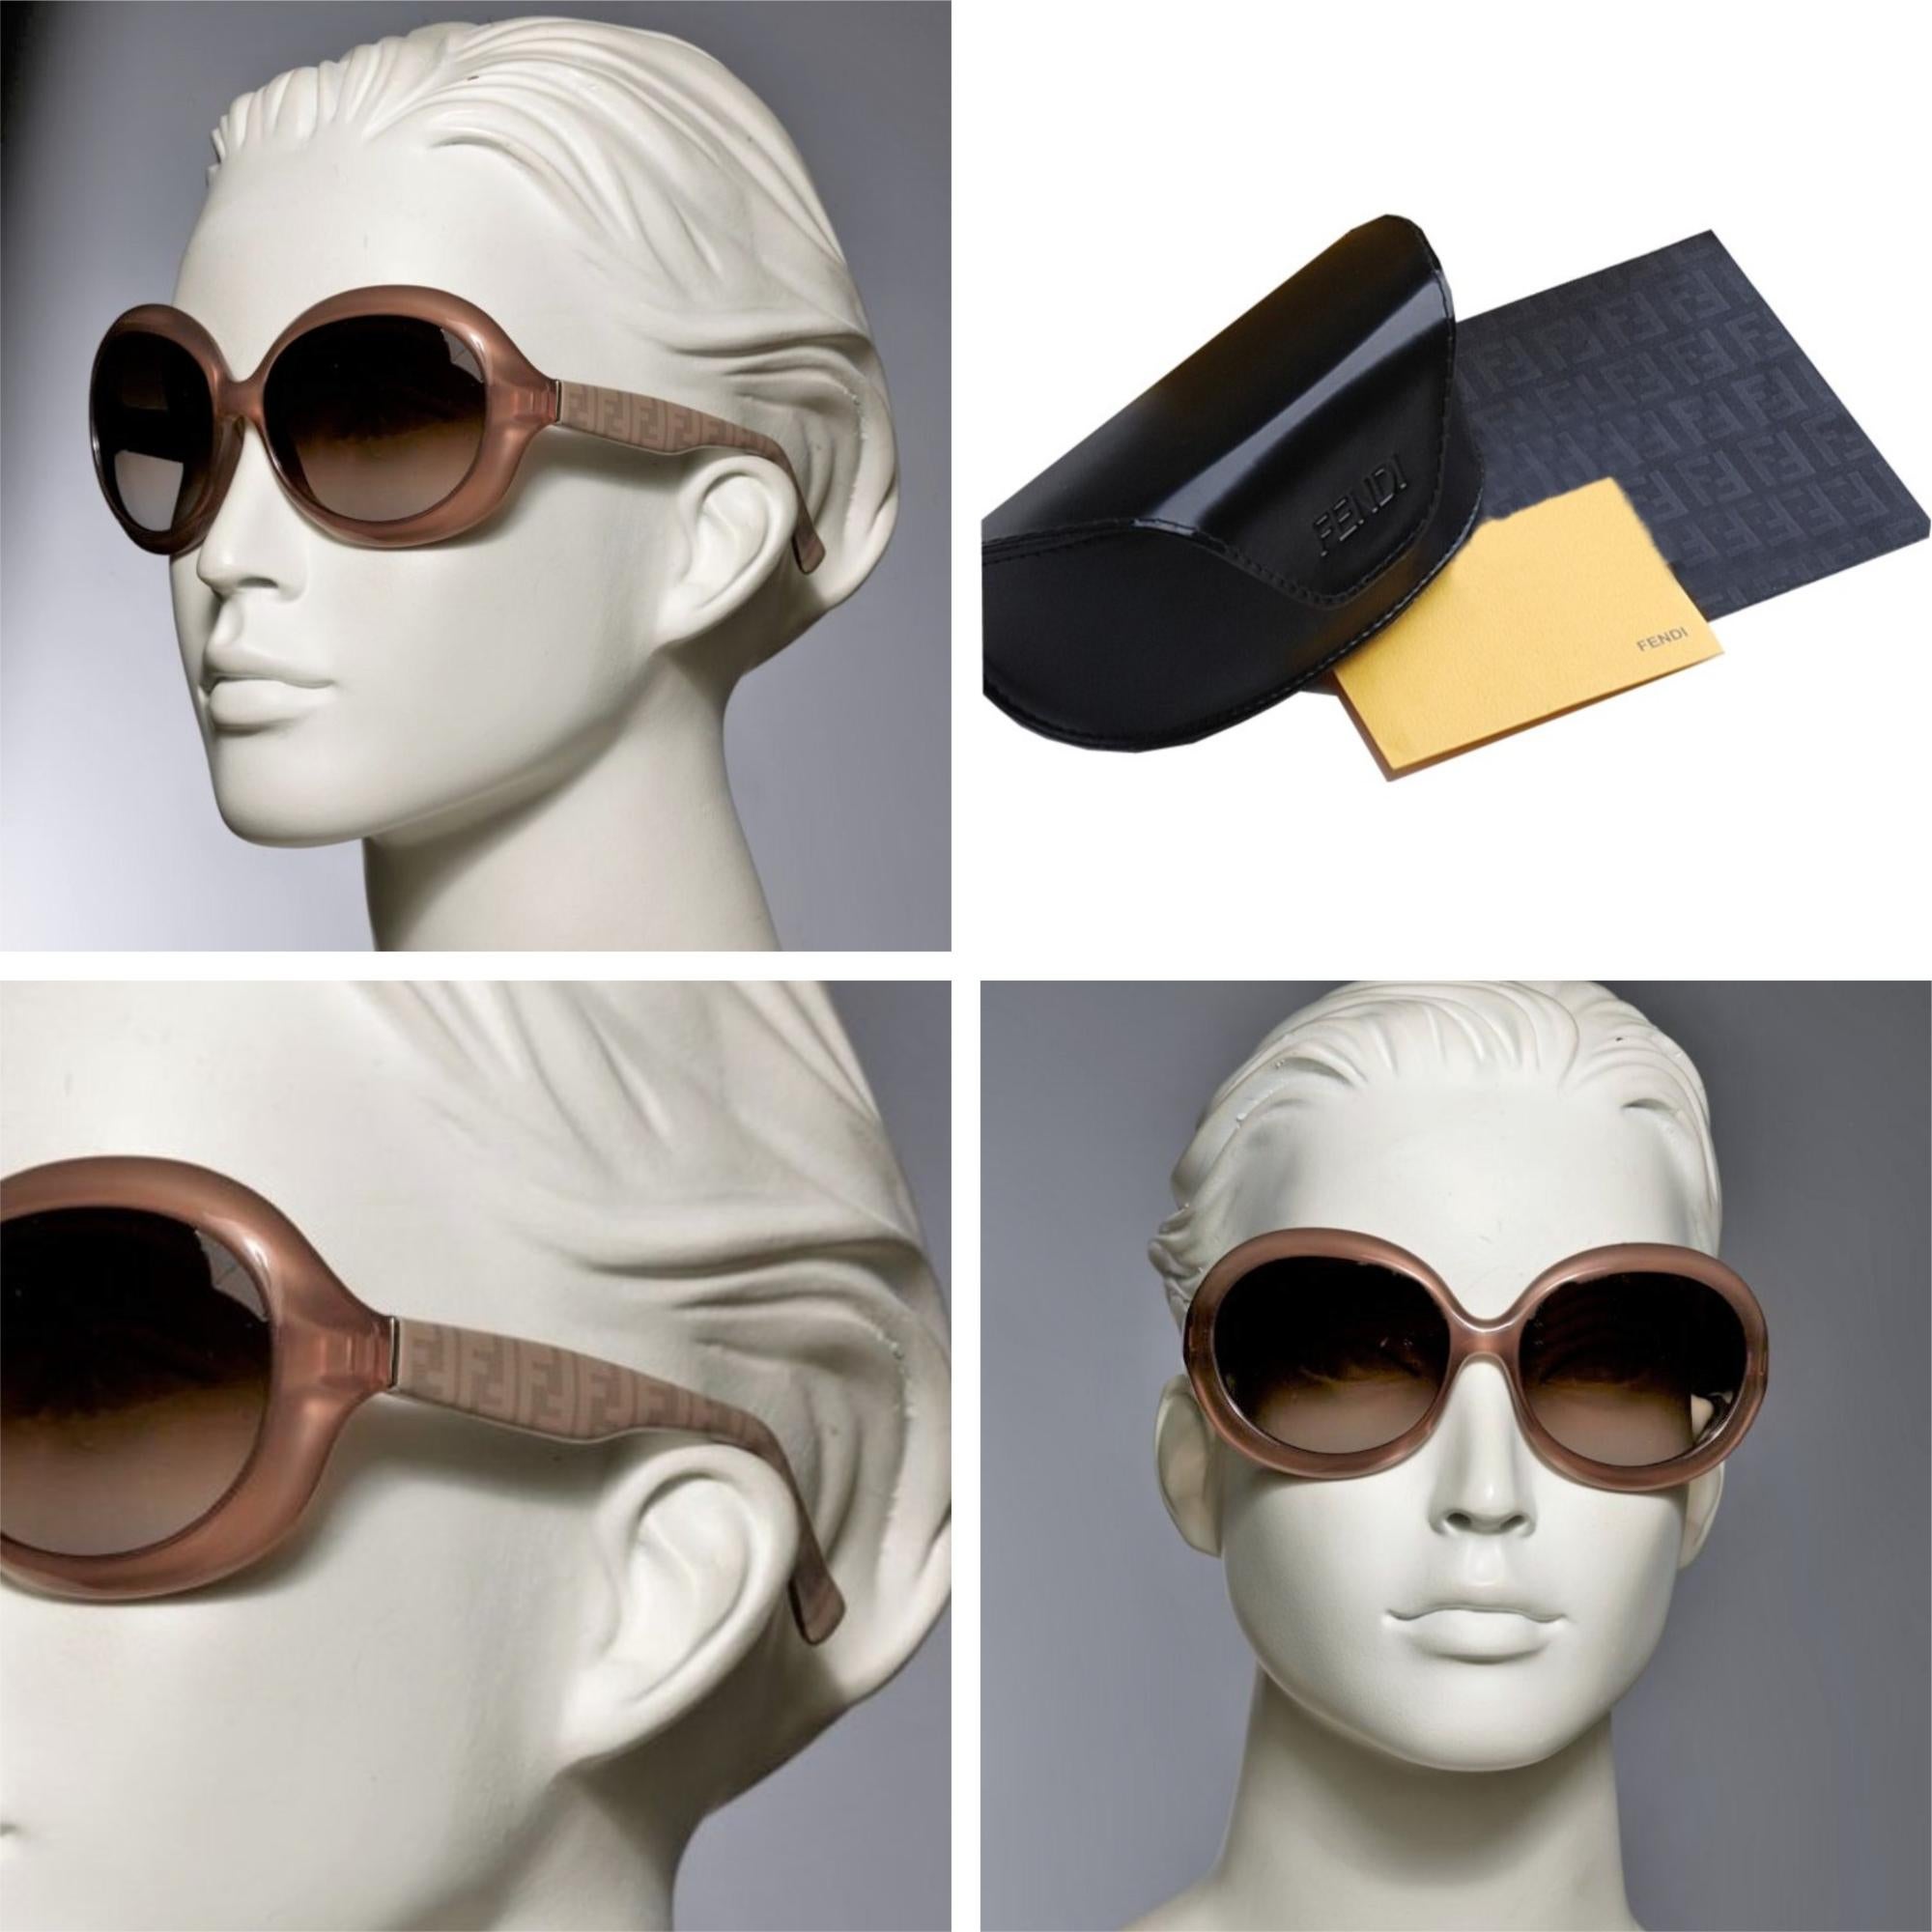 New Fendi Champagne Sunglasses with Case

Brand New
Fendi FF Logo at Sides
Beautiful Champagne Frames
60-16-125
Lightweight Scratch and Impact Resistant
Made in Italy
100% UVA/UVB Protection
Comes with Case & Cleaning Clothing